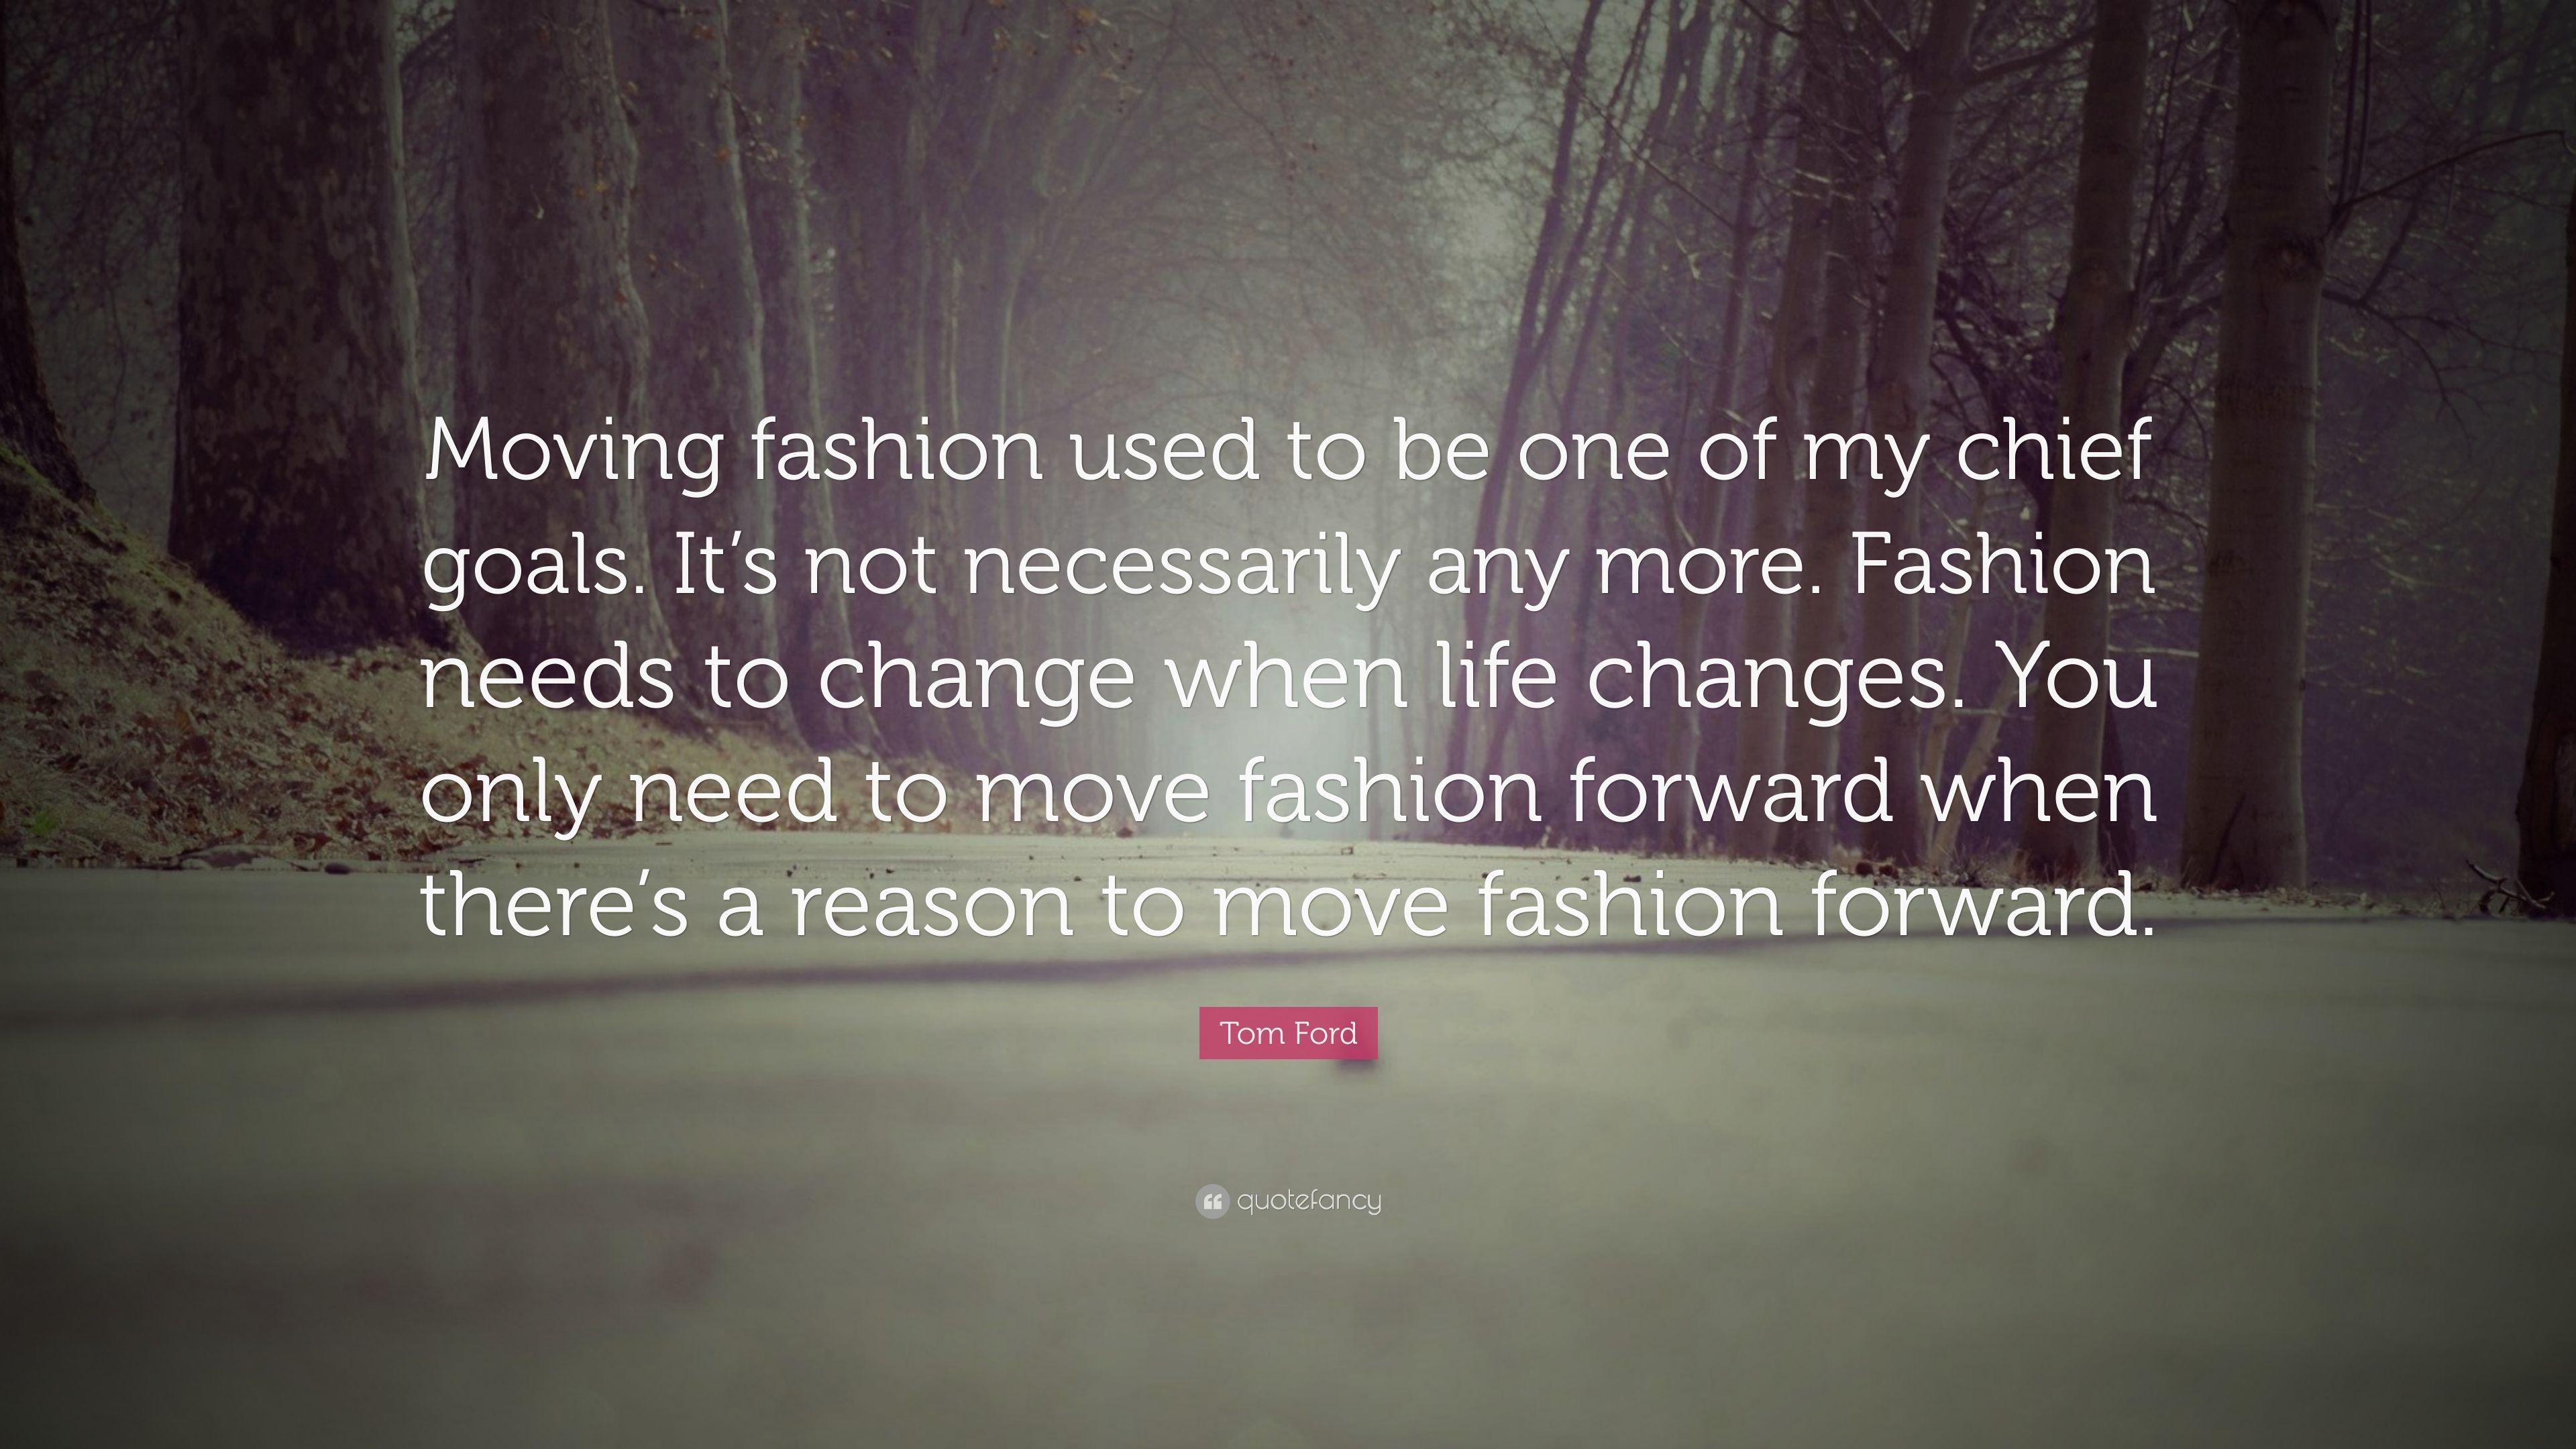 Tom Ford Quote: “Moving fashion used to be one of my chief goals